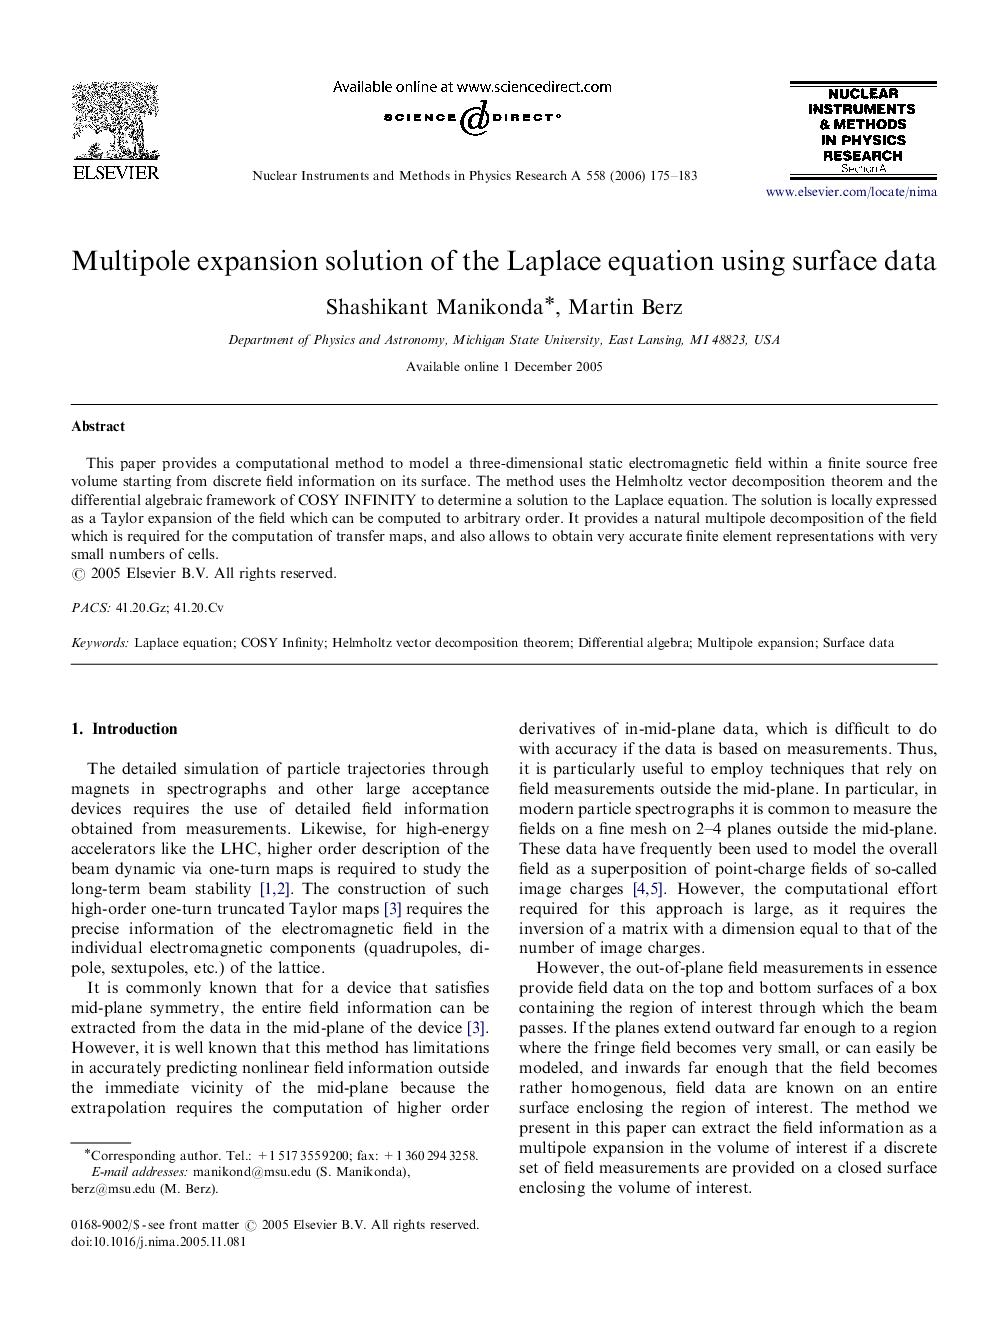 Multipole expansion solution of the Laplace equation using surface data